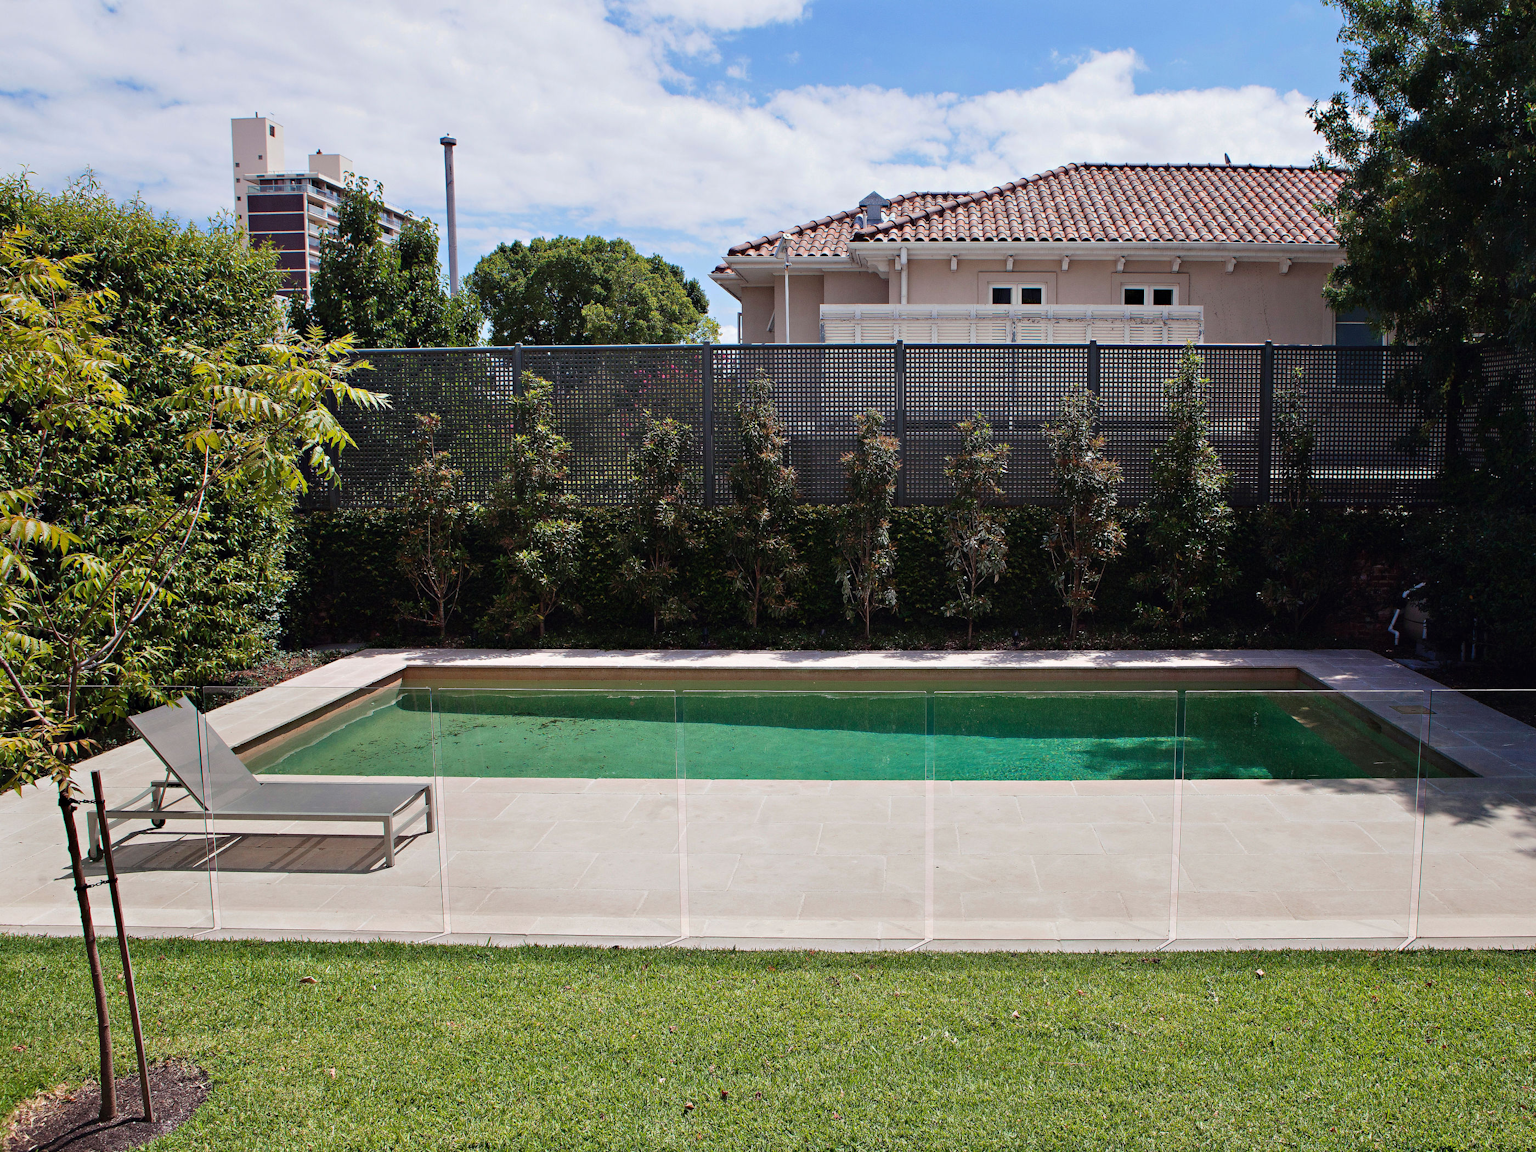 Rectangular pool surrounded by large format La Roche limestone pavers